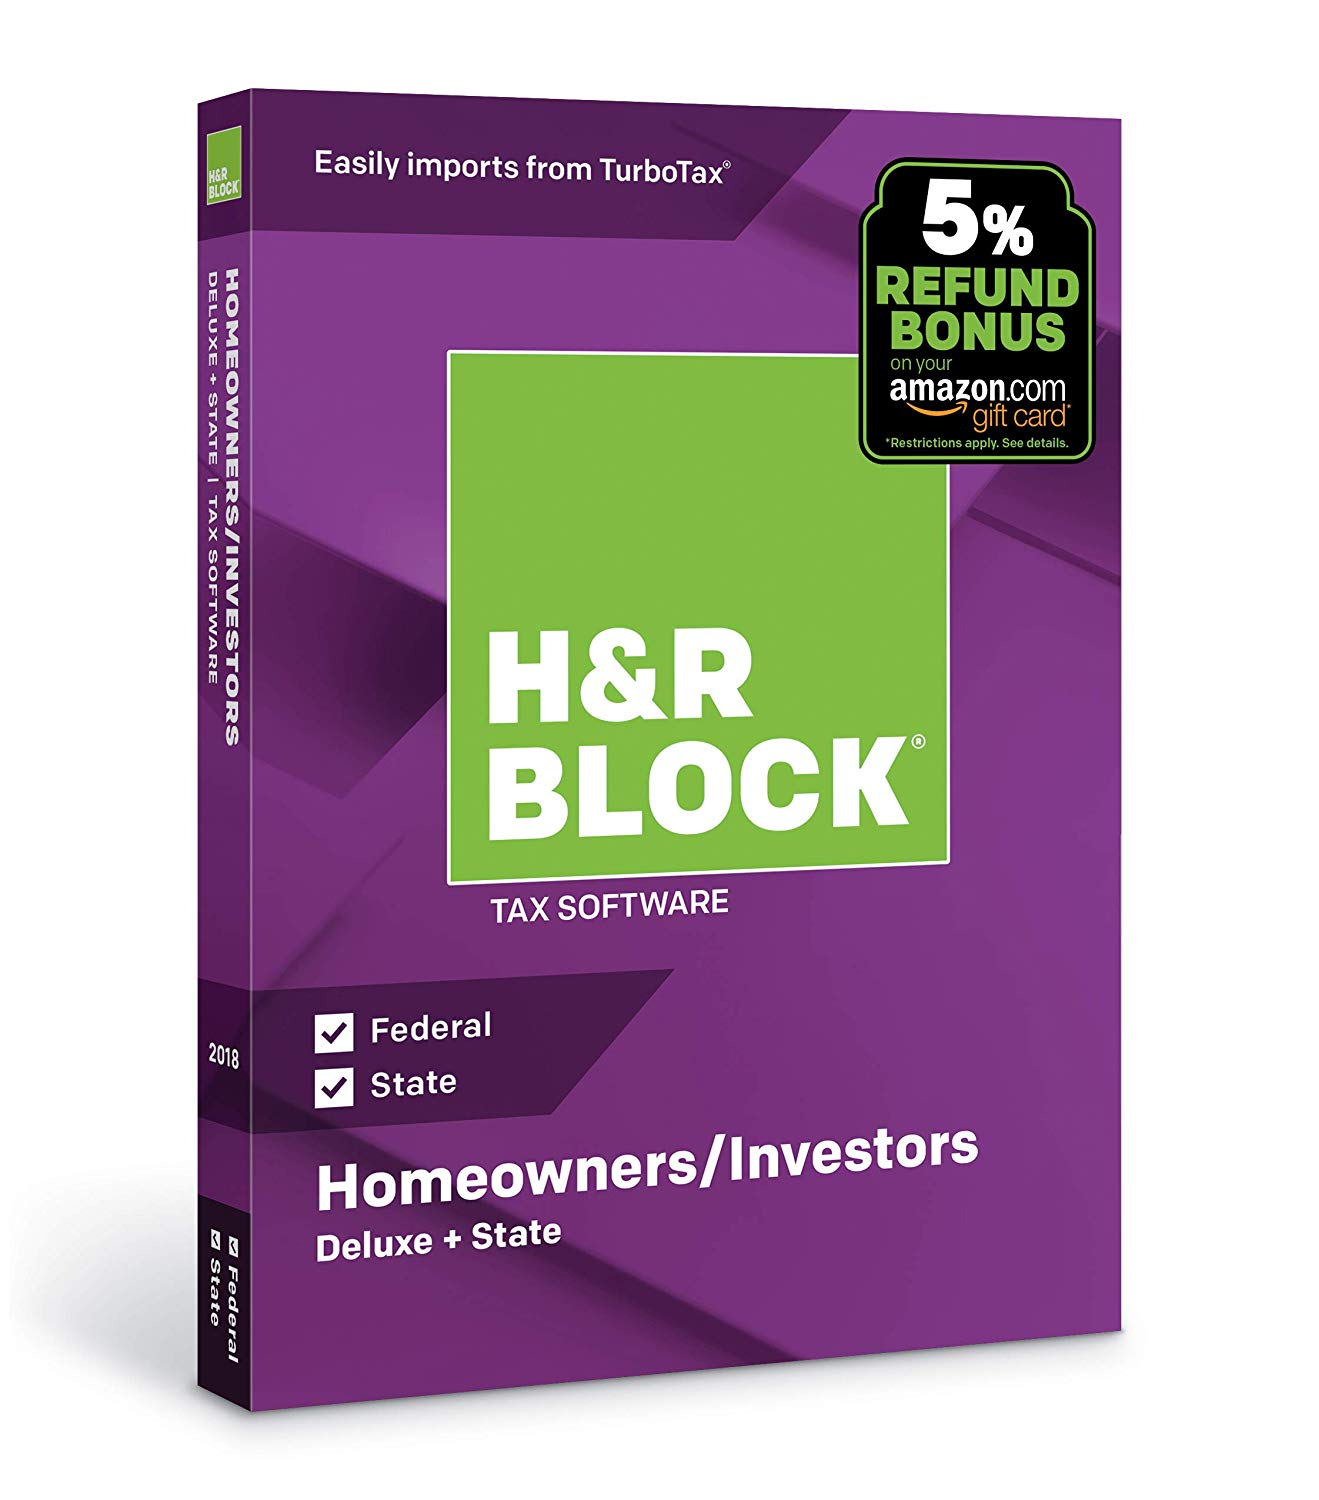 h-r-block-tax-software-deluxe-state-2018-with-5-refund-bonus-offer